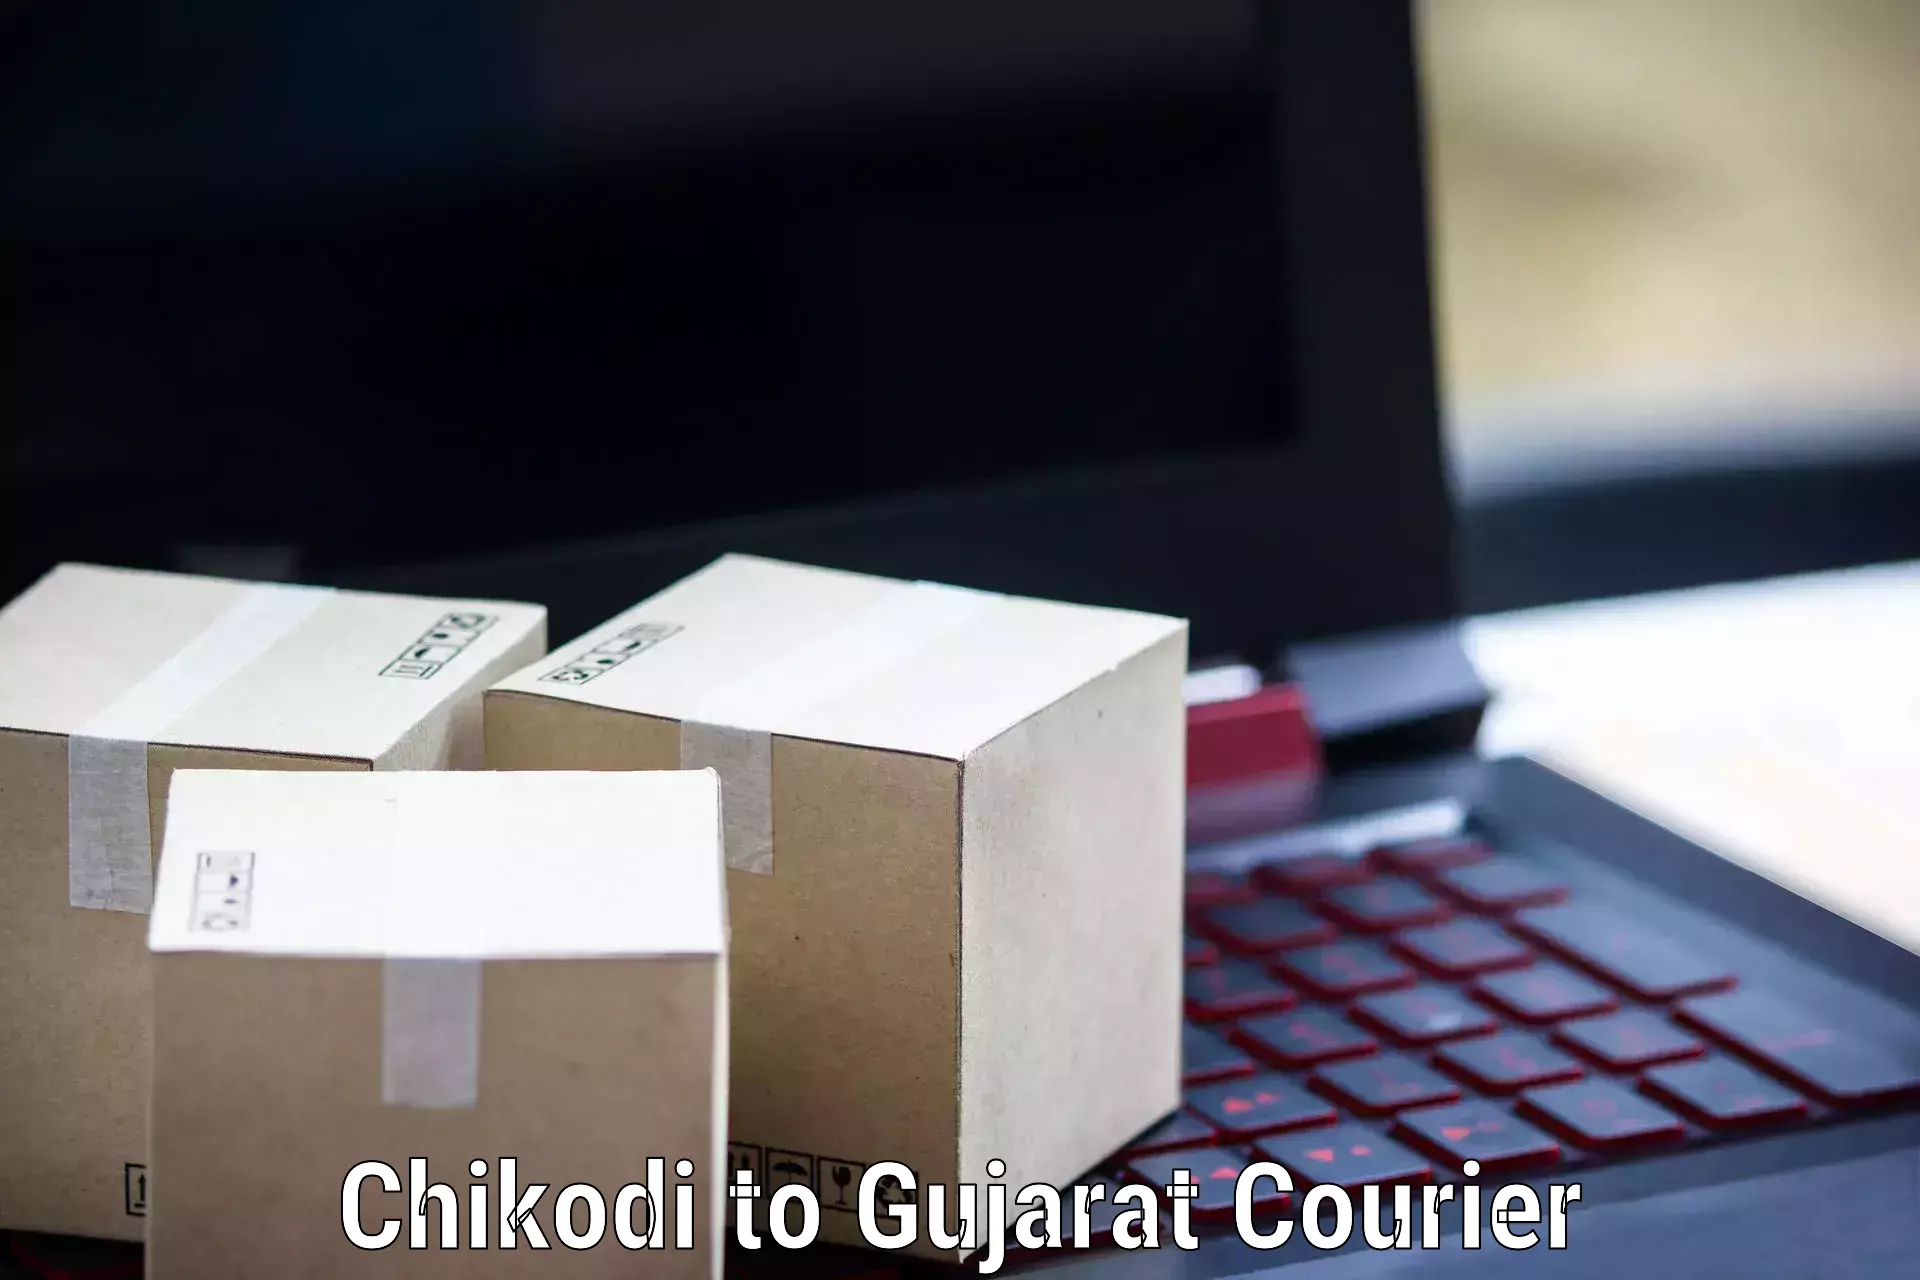 Express delivery network Chikodi to Dholera